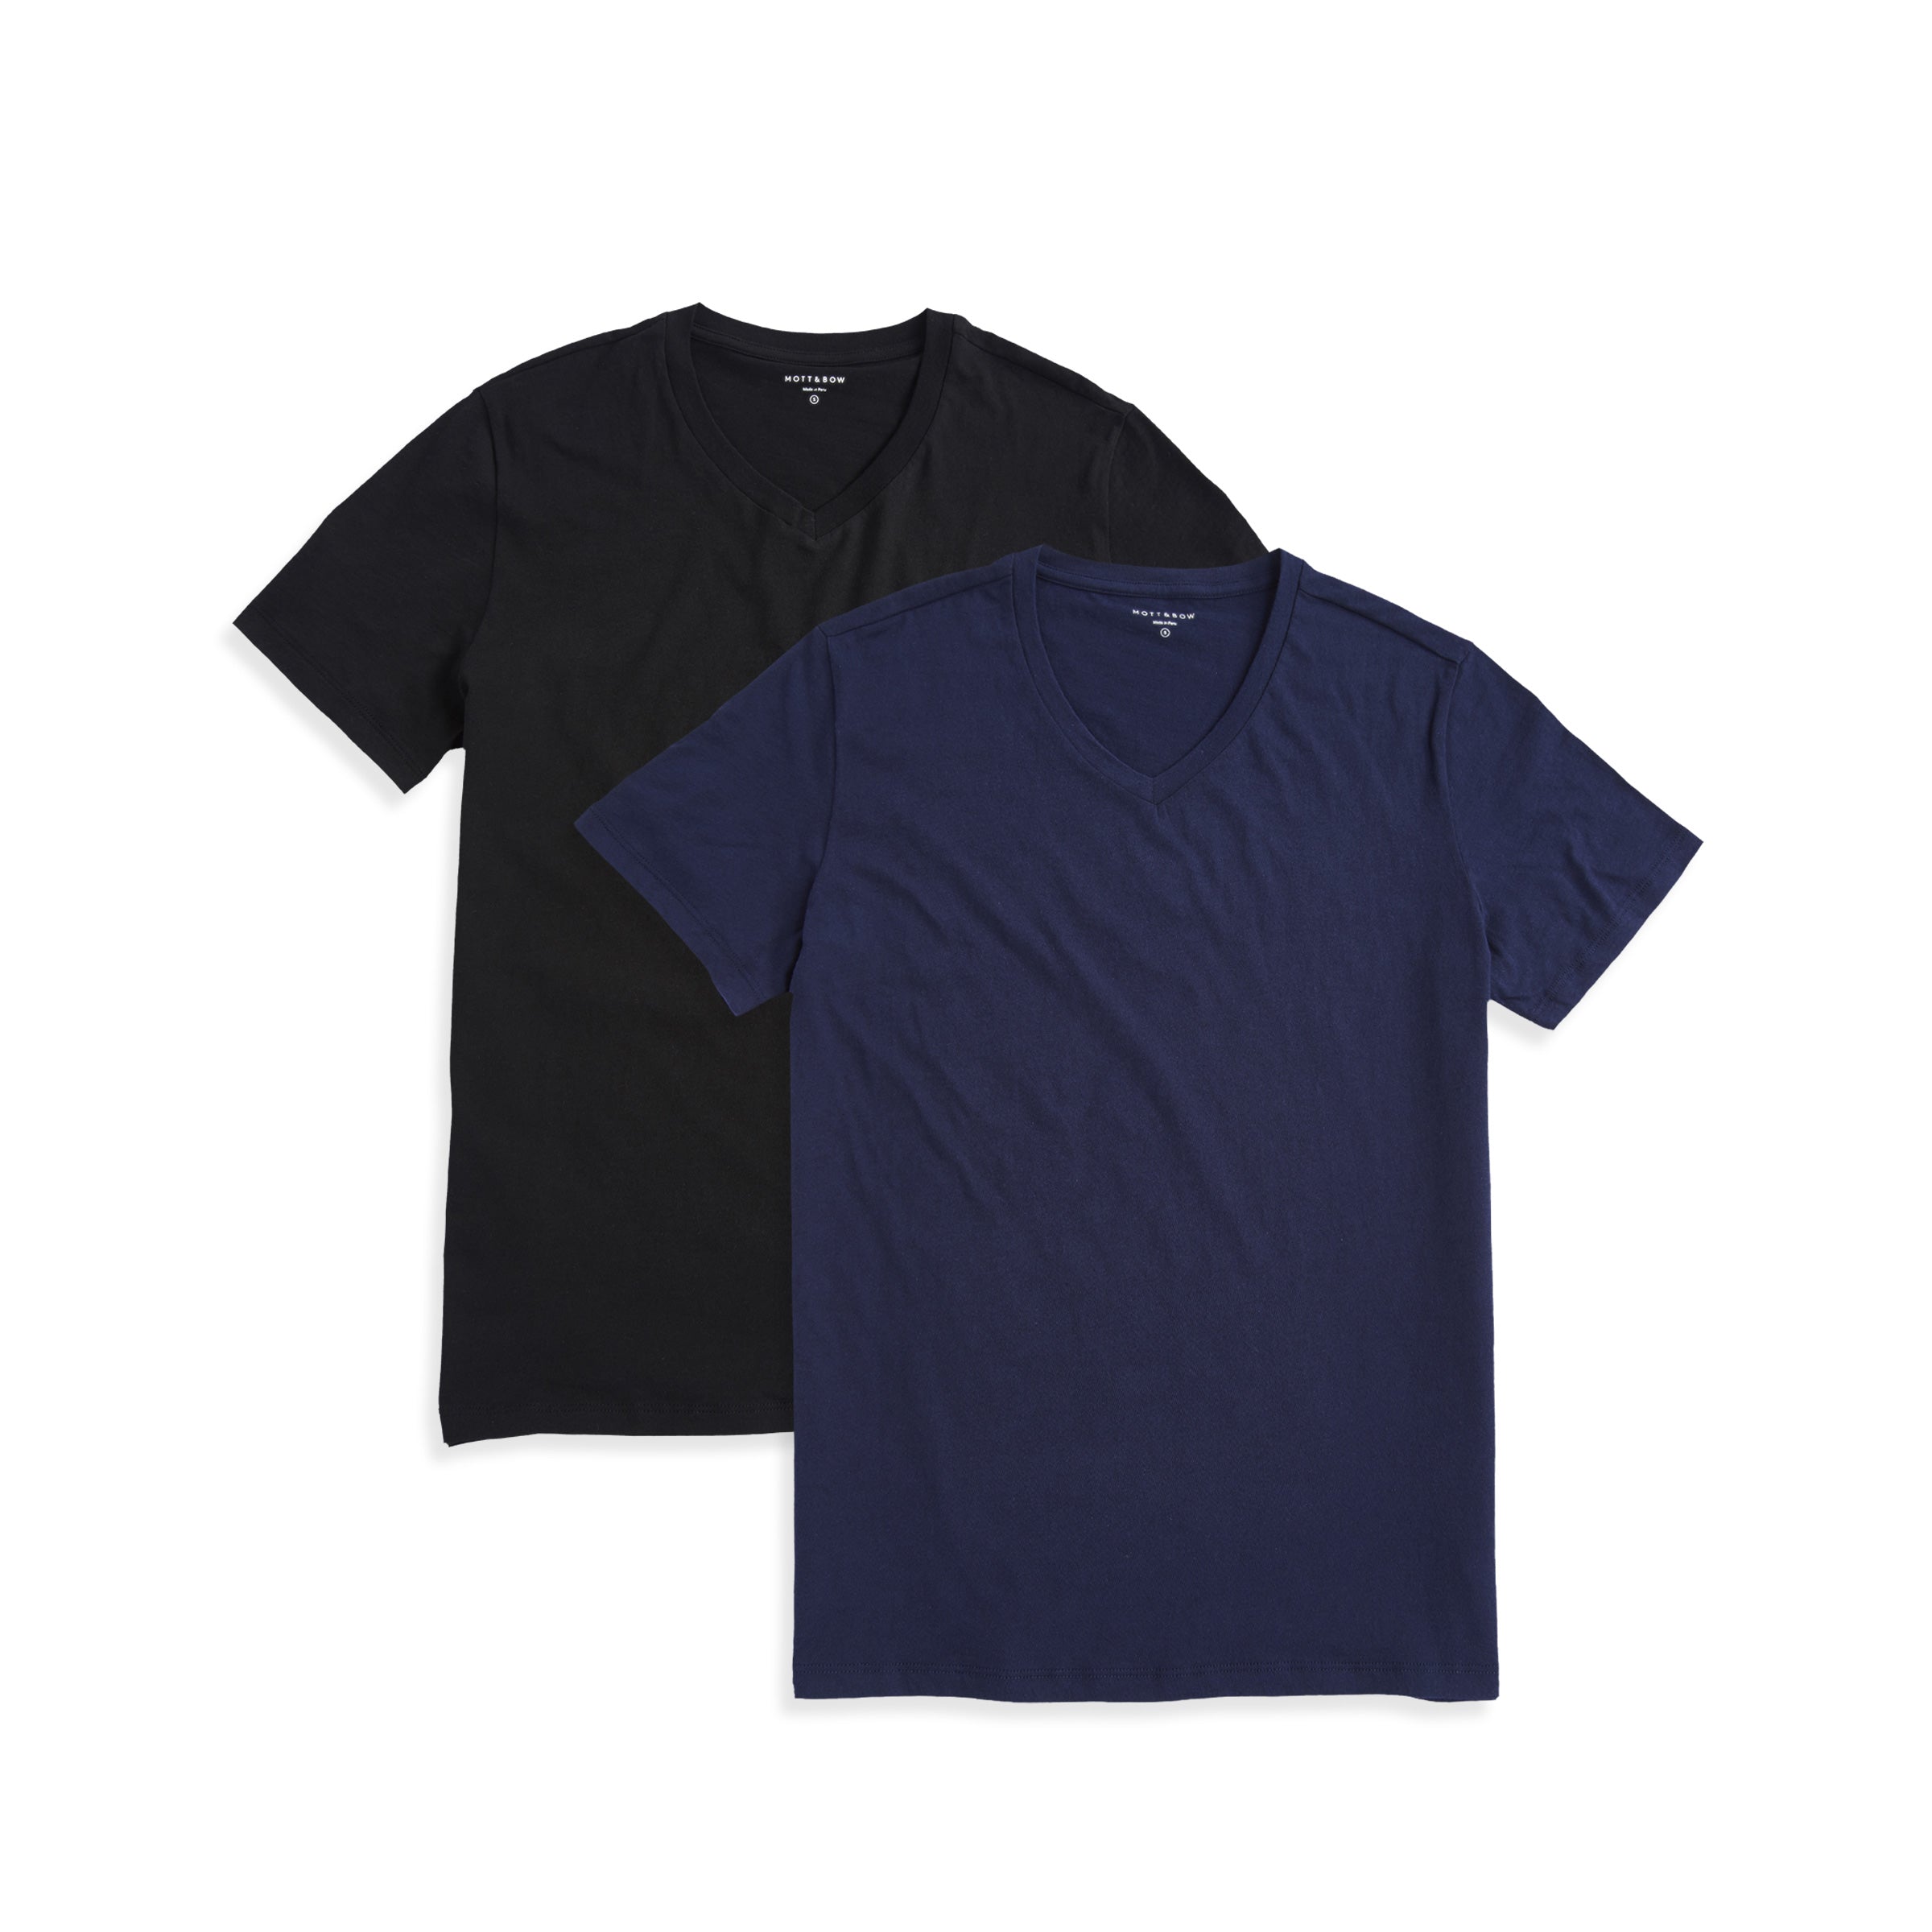  wearing Black/Navy Classic V-Neck Driggs 2-Pack